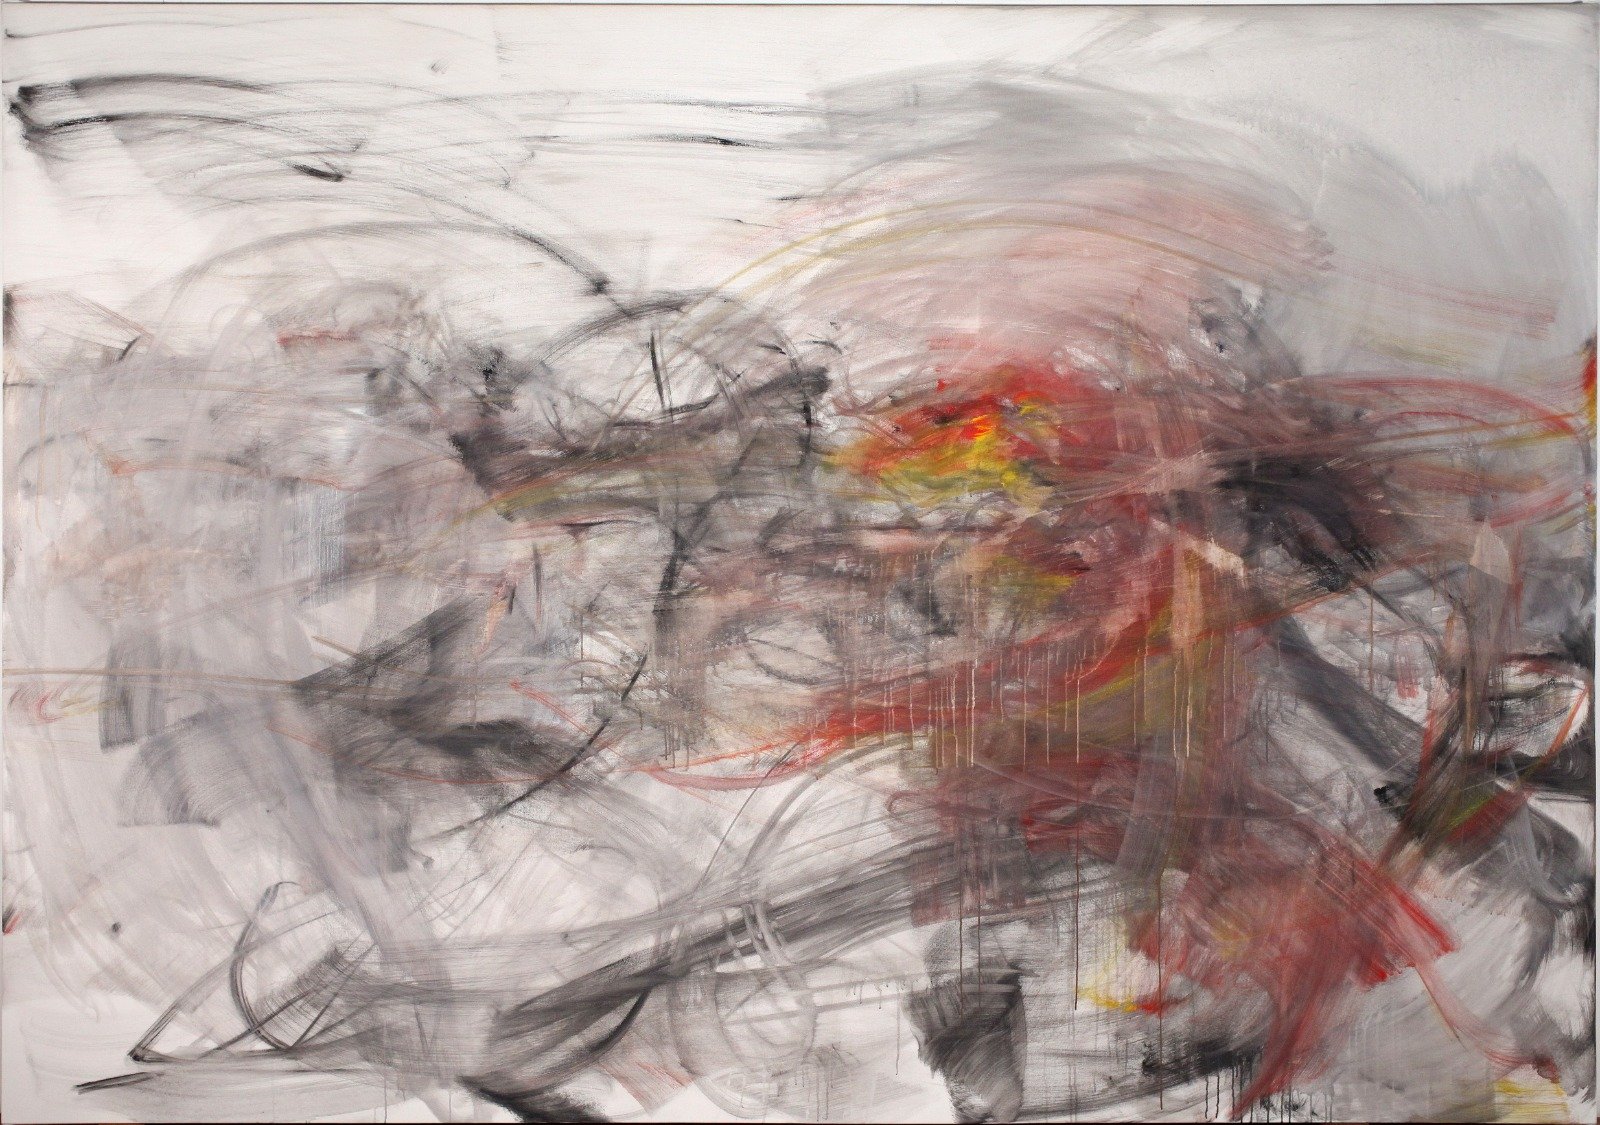 Grace, (Whitworth) 2015, oil on canvas, 87 x 123 inches